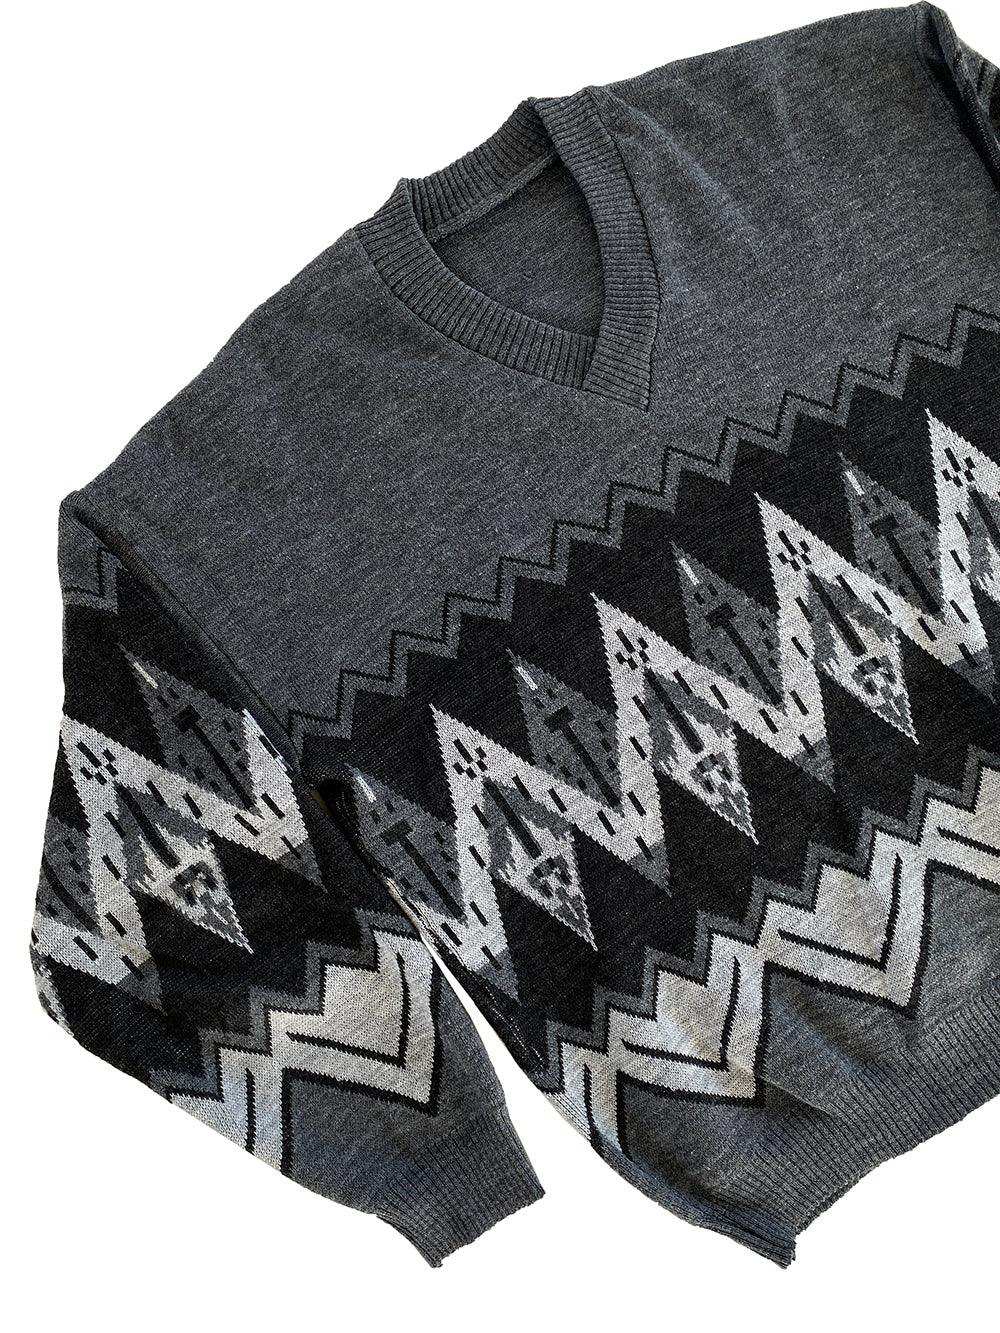 Vintage 80s/90s Unisex Knitted Geometric Sweater - Balagan Vintage Sweater 00s, 80s, 90s, knitted sweater, NEW IN, sweater